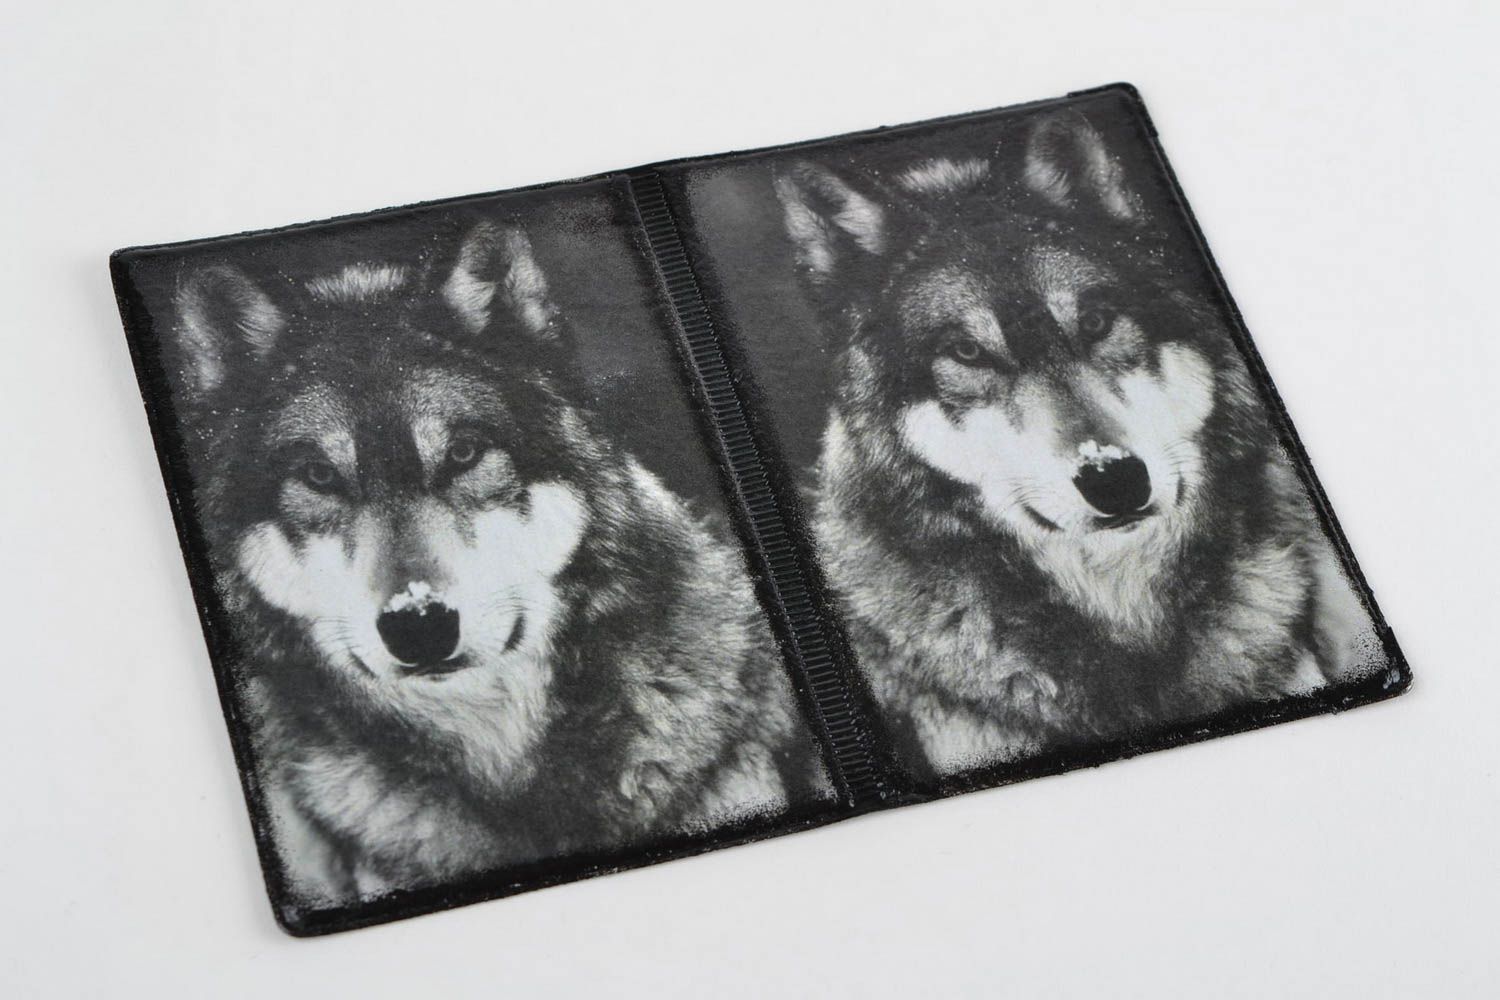 Handmade stylish faux leather passport cover with decoupage image of gray wolf photo 2